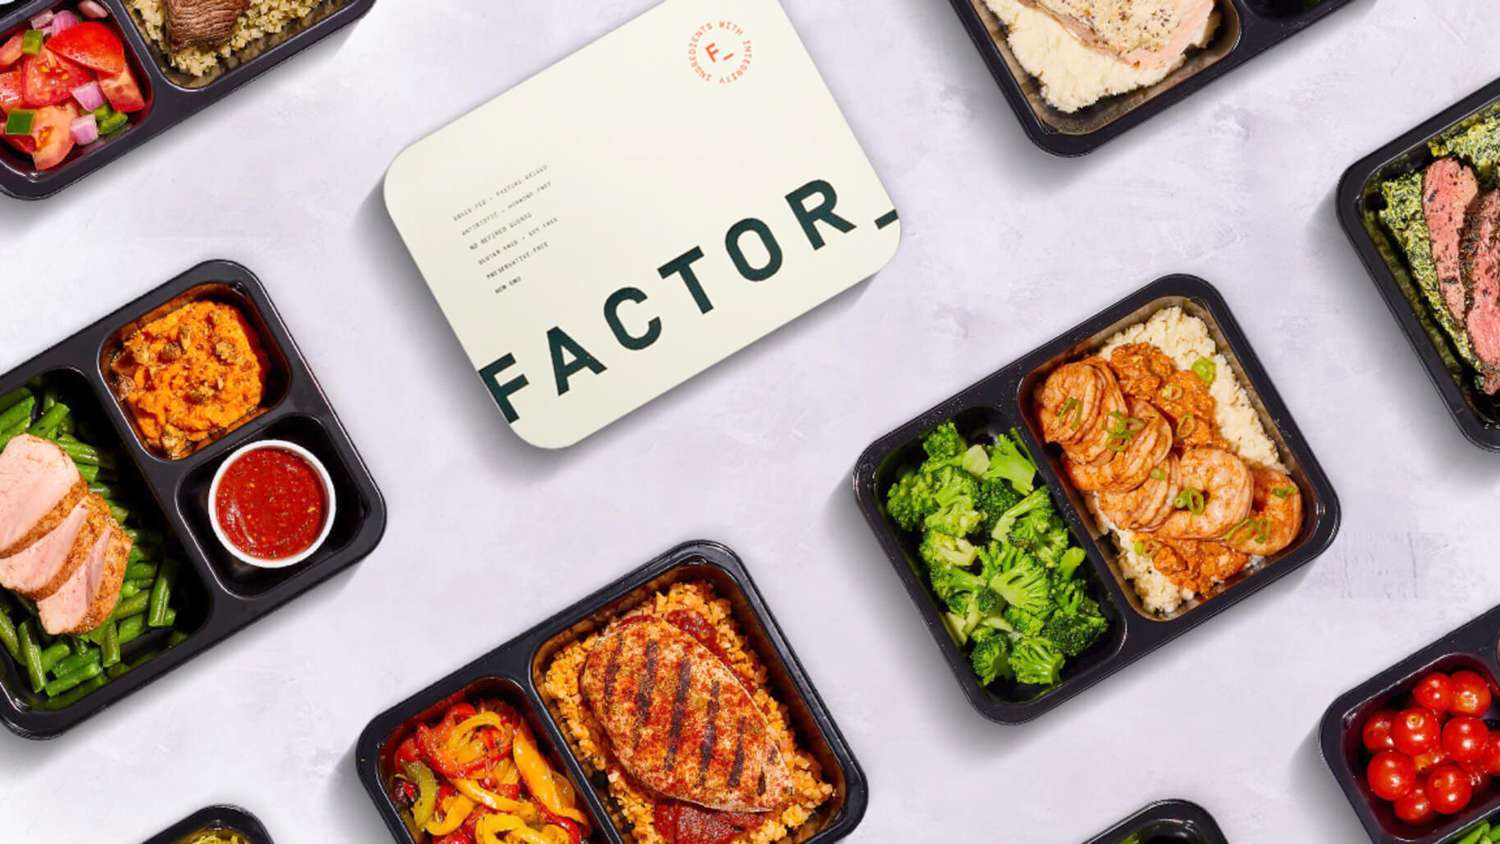 Up to $878 off with Factor Meals